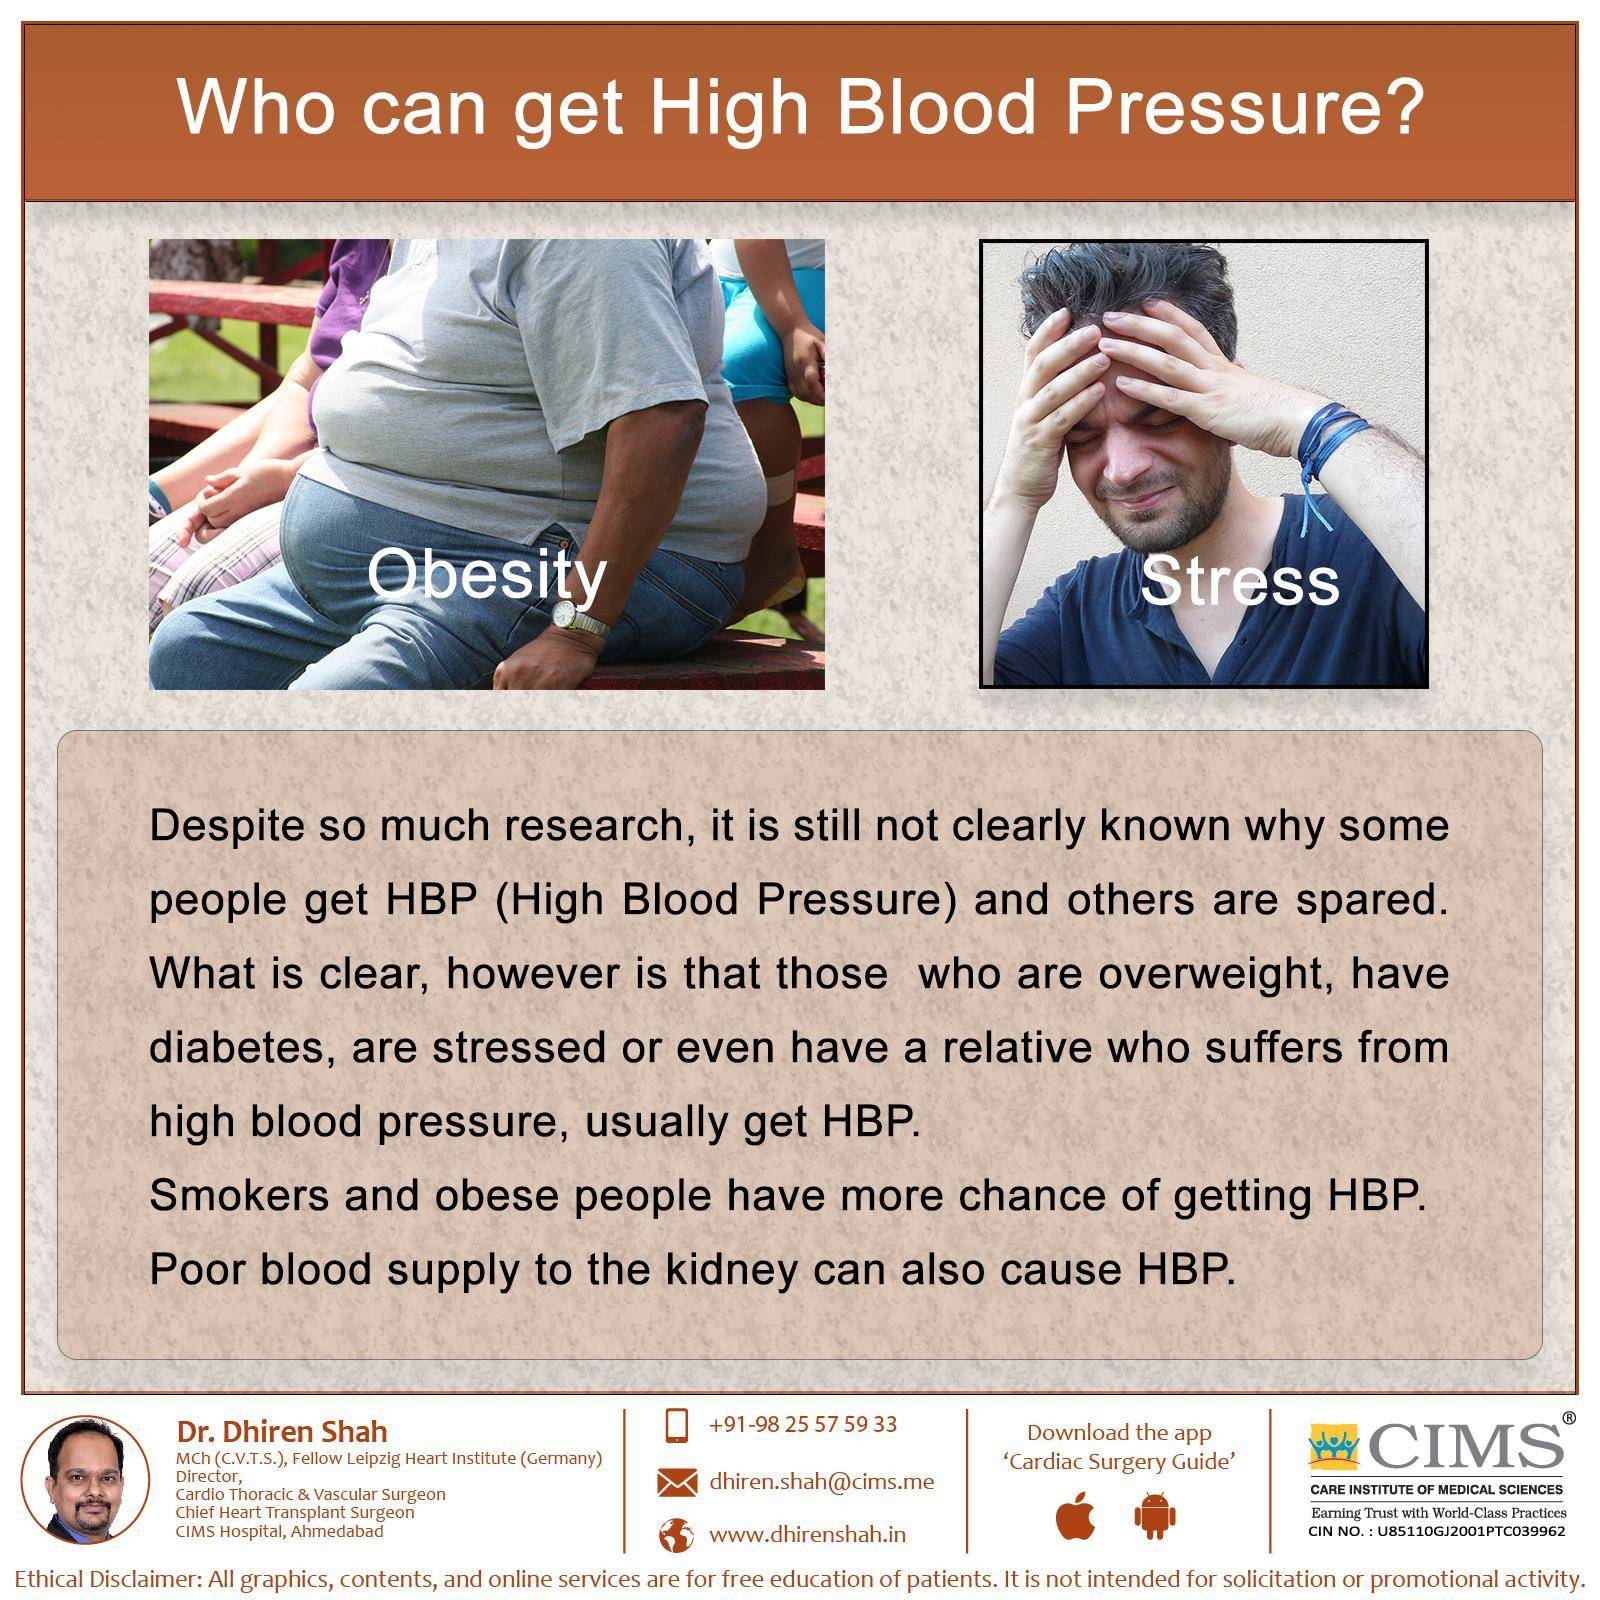 Who can get High Blood Pressure?